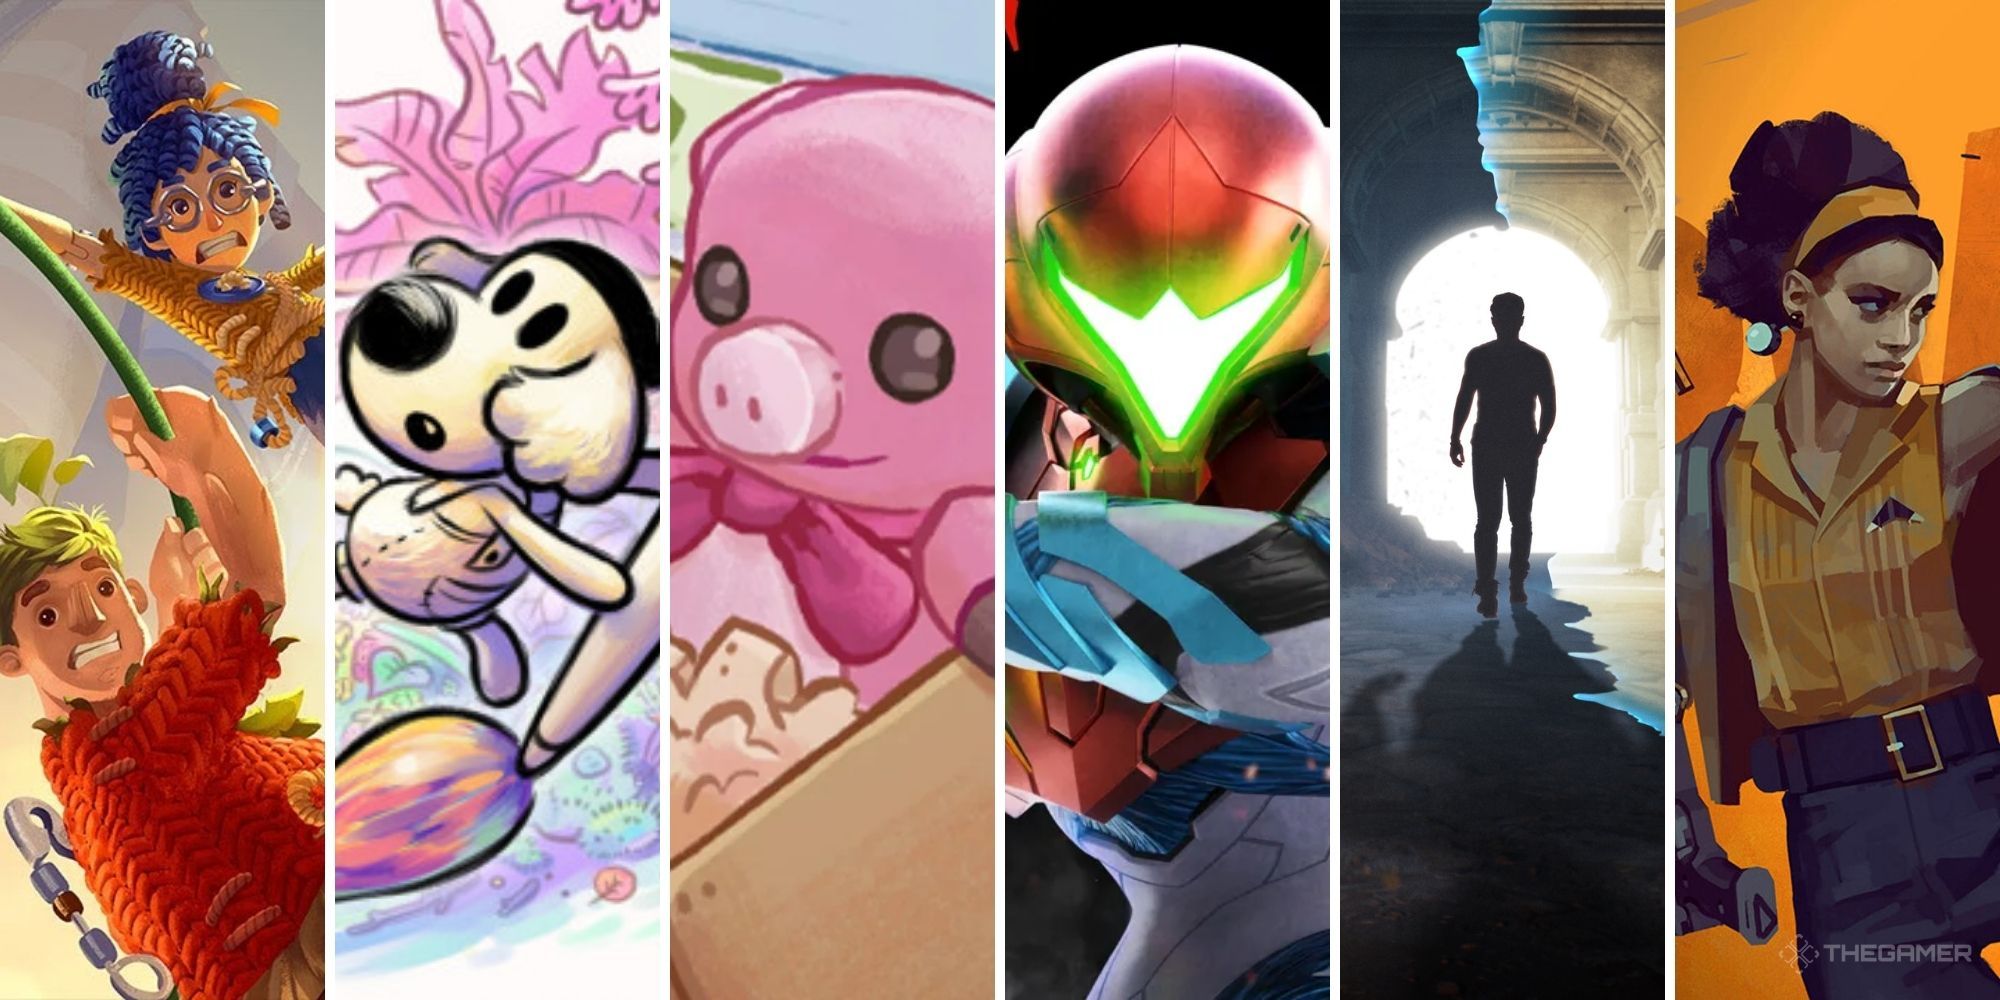 BAFTA Games Awards 2022: Nominees announced and how to vote on